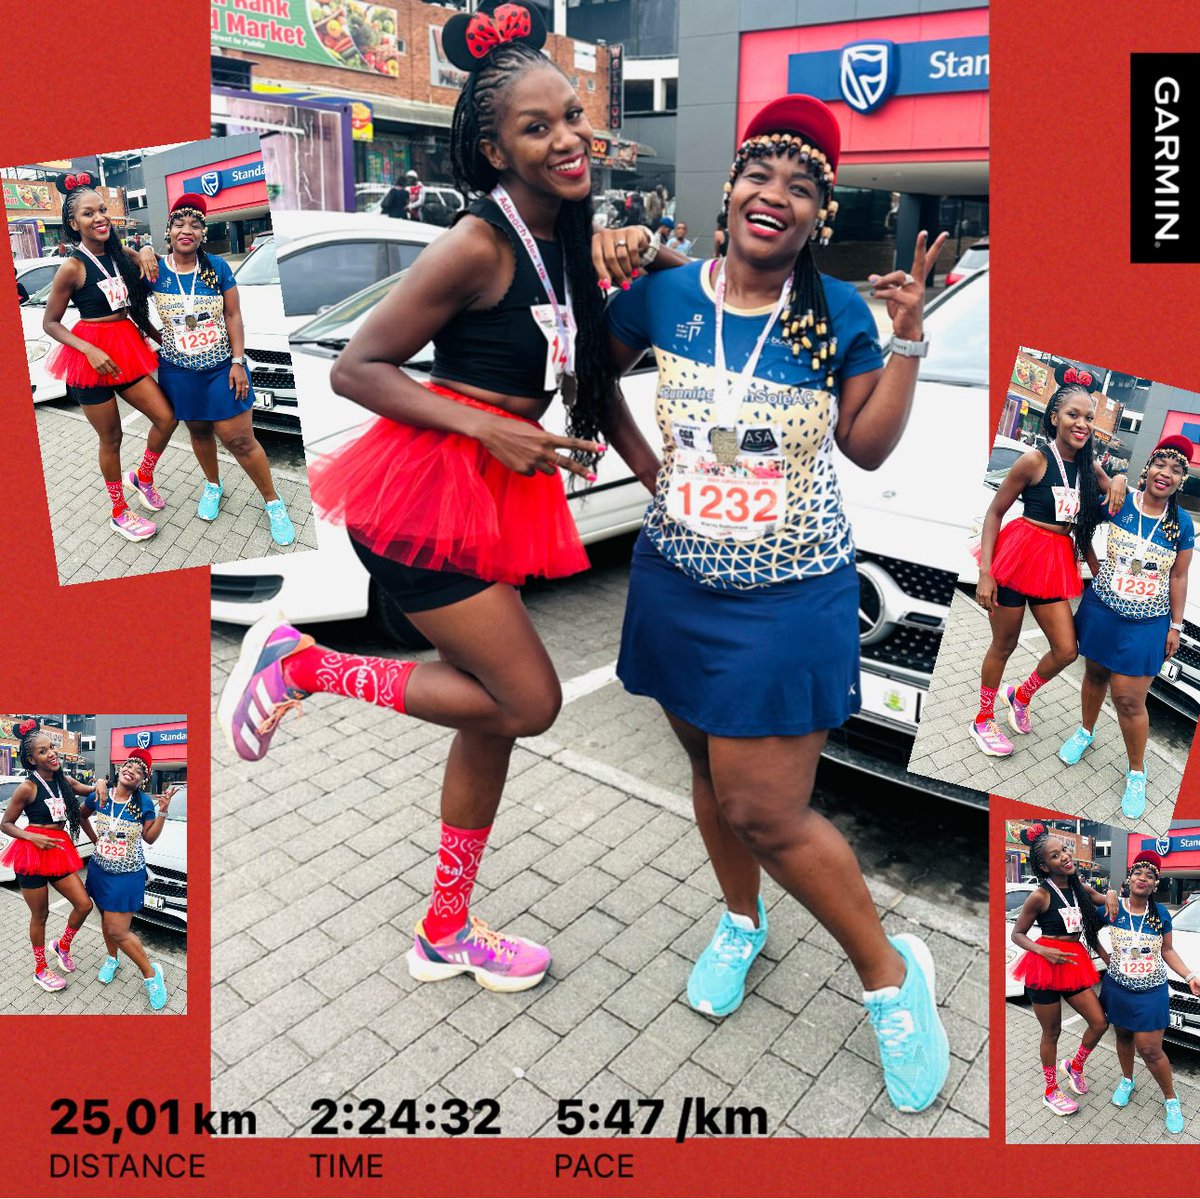 Midweek 25km done ☑️ Shout out to my beautiful and consistent Sis @khensiPetu ❤️👑 #IPaintedMyRun #TrapnLos #RunningWithTumiSole #FitnessGoals #WednesdayMotivation #Goals #SkhindiGangCoaching #FetchYourBody2024